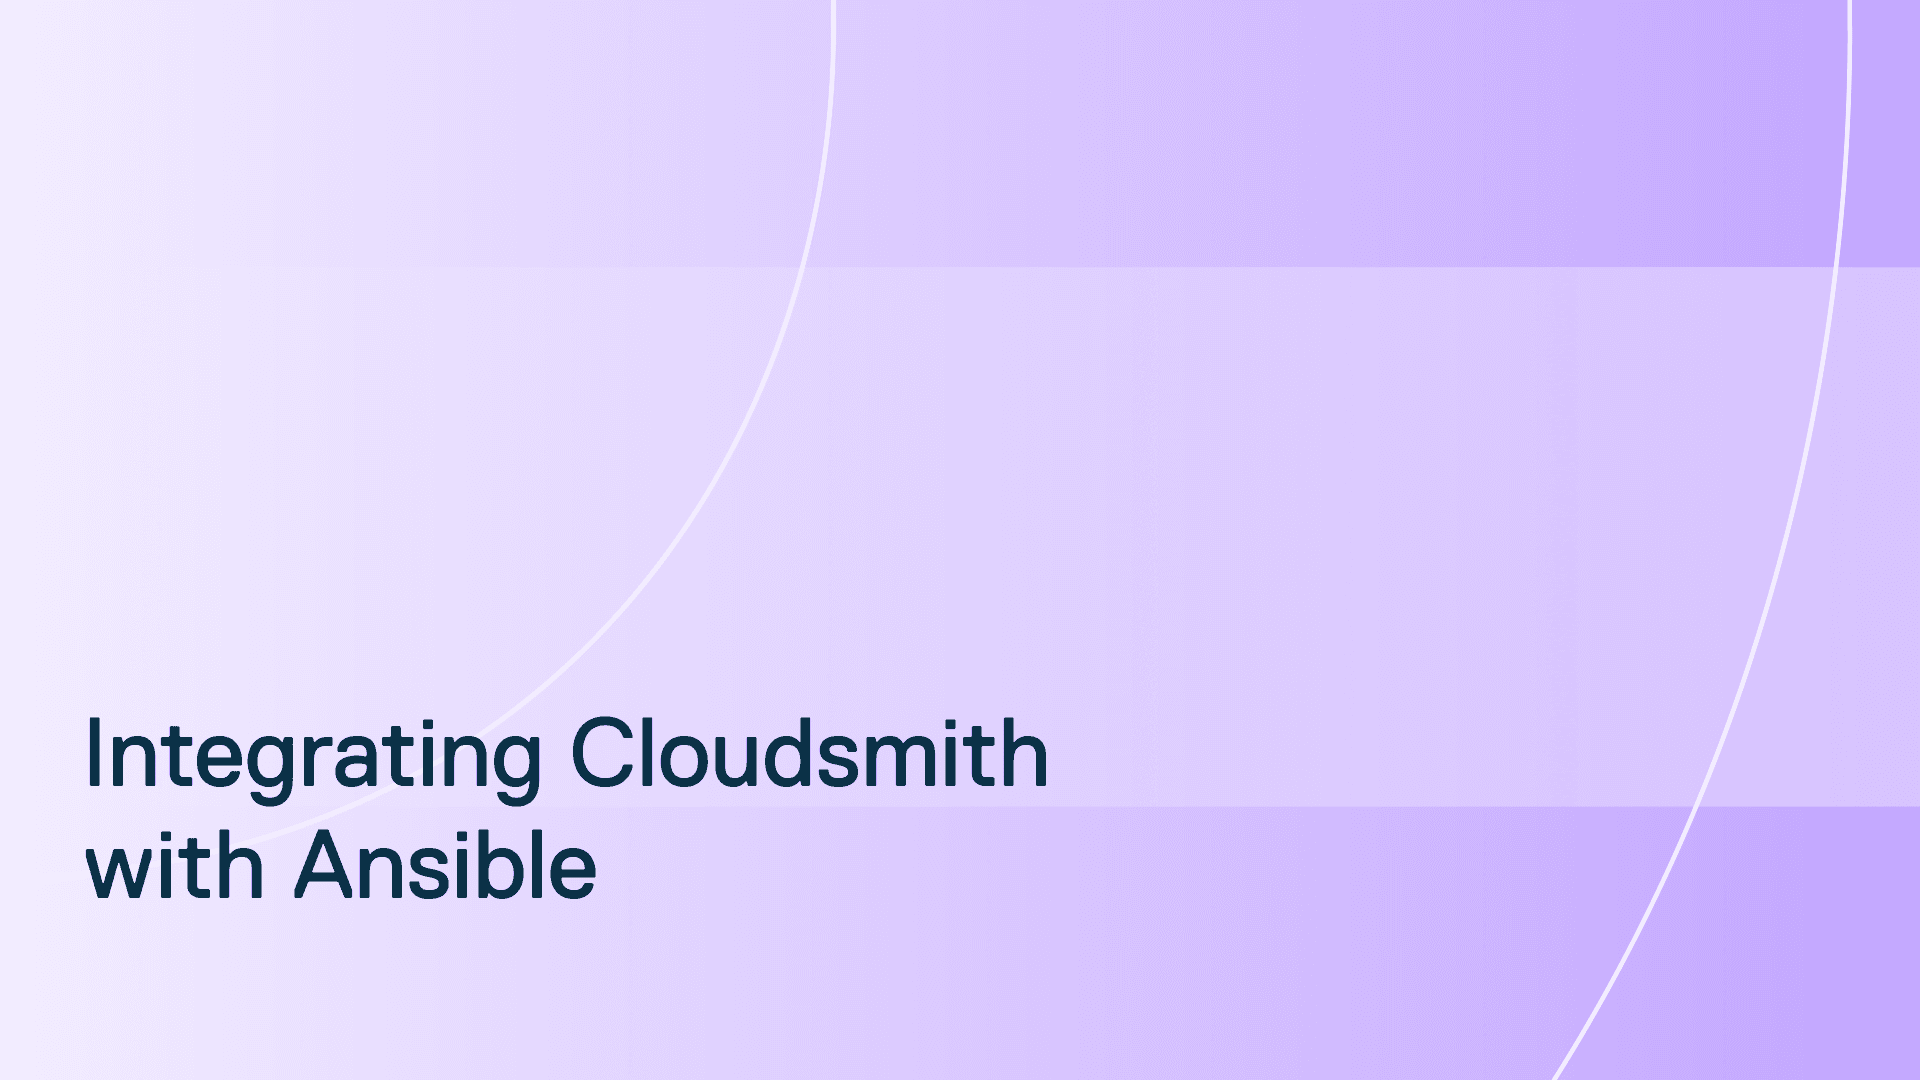 Using Ansible to deploy packages from Cloudsmith